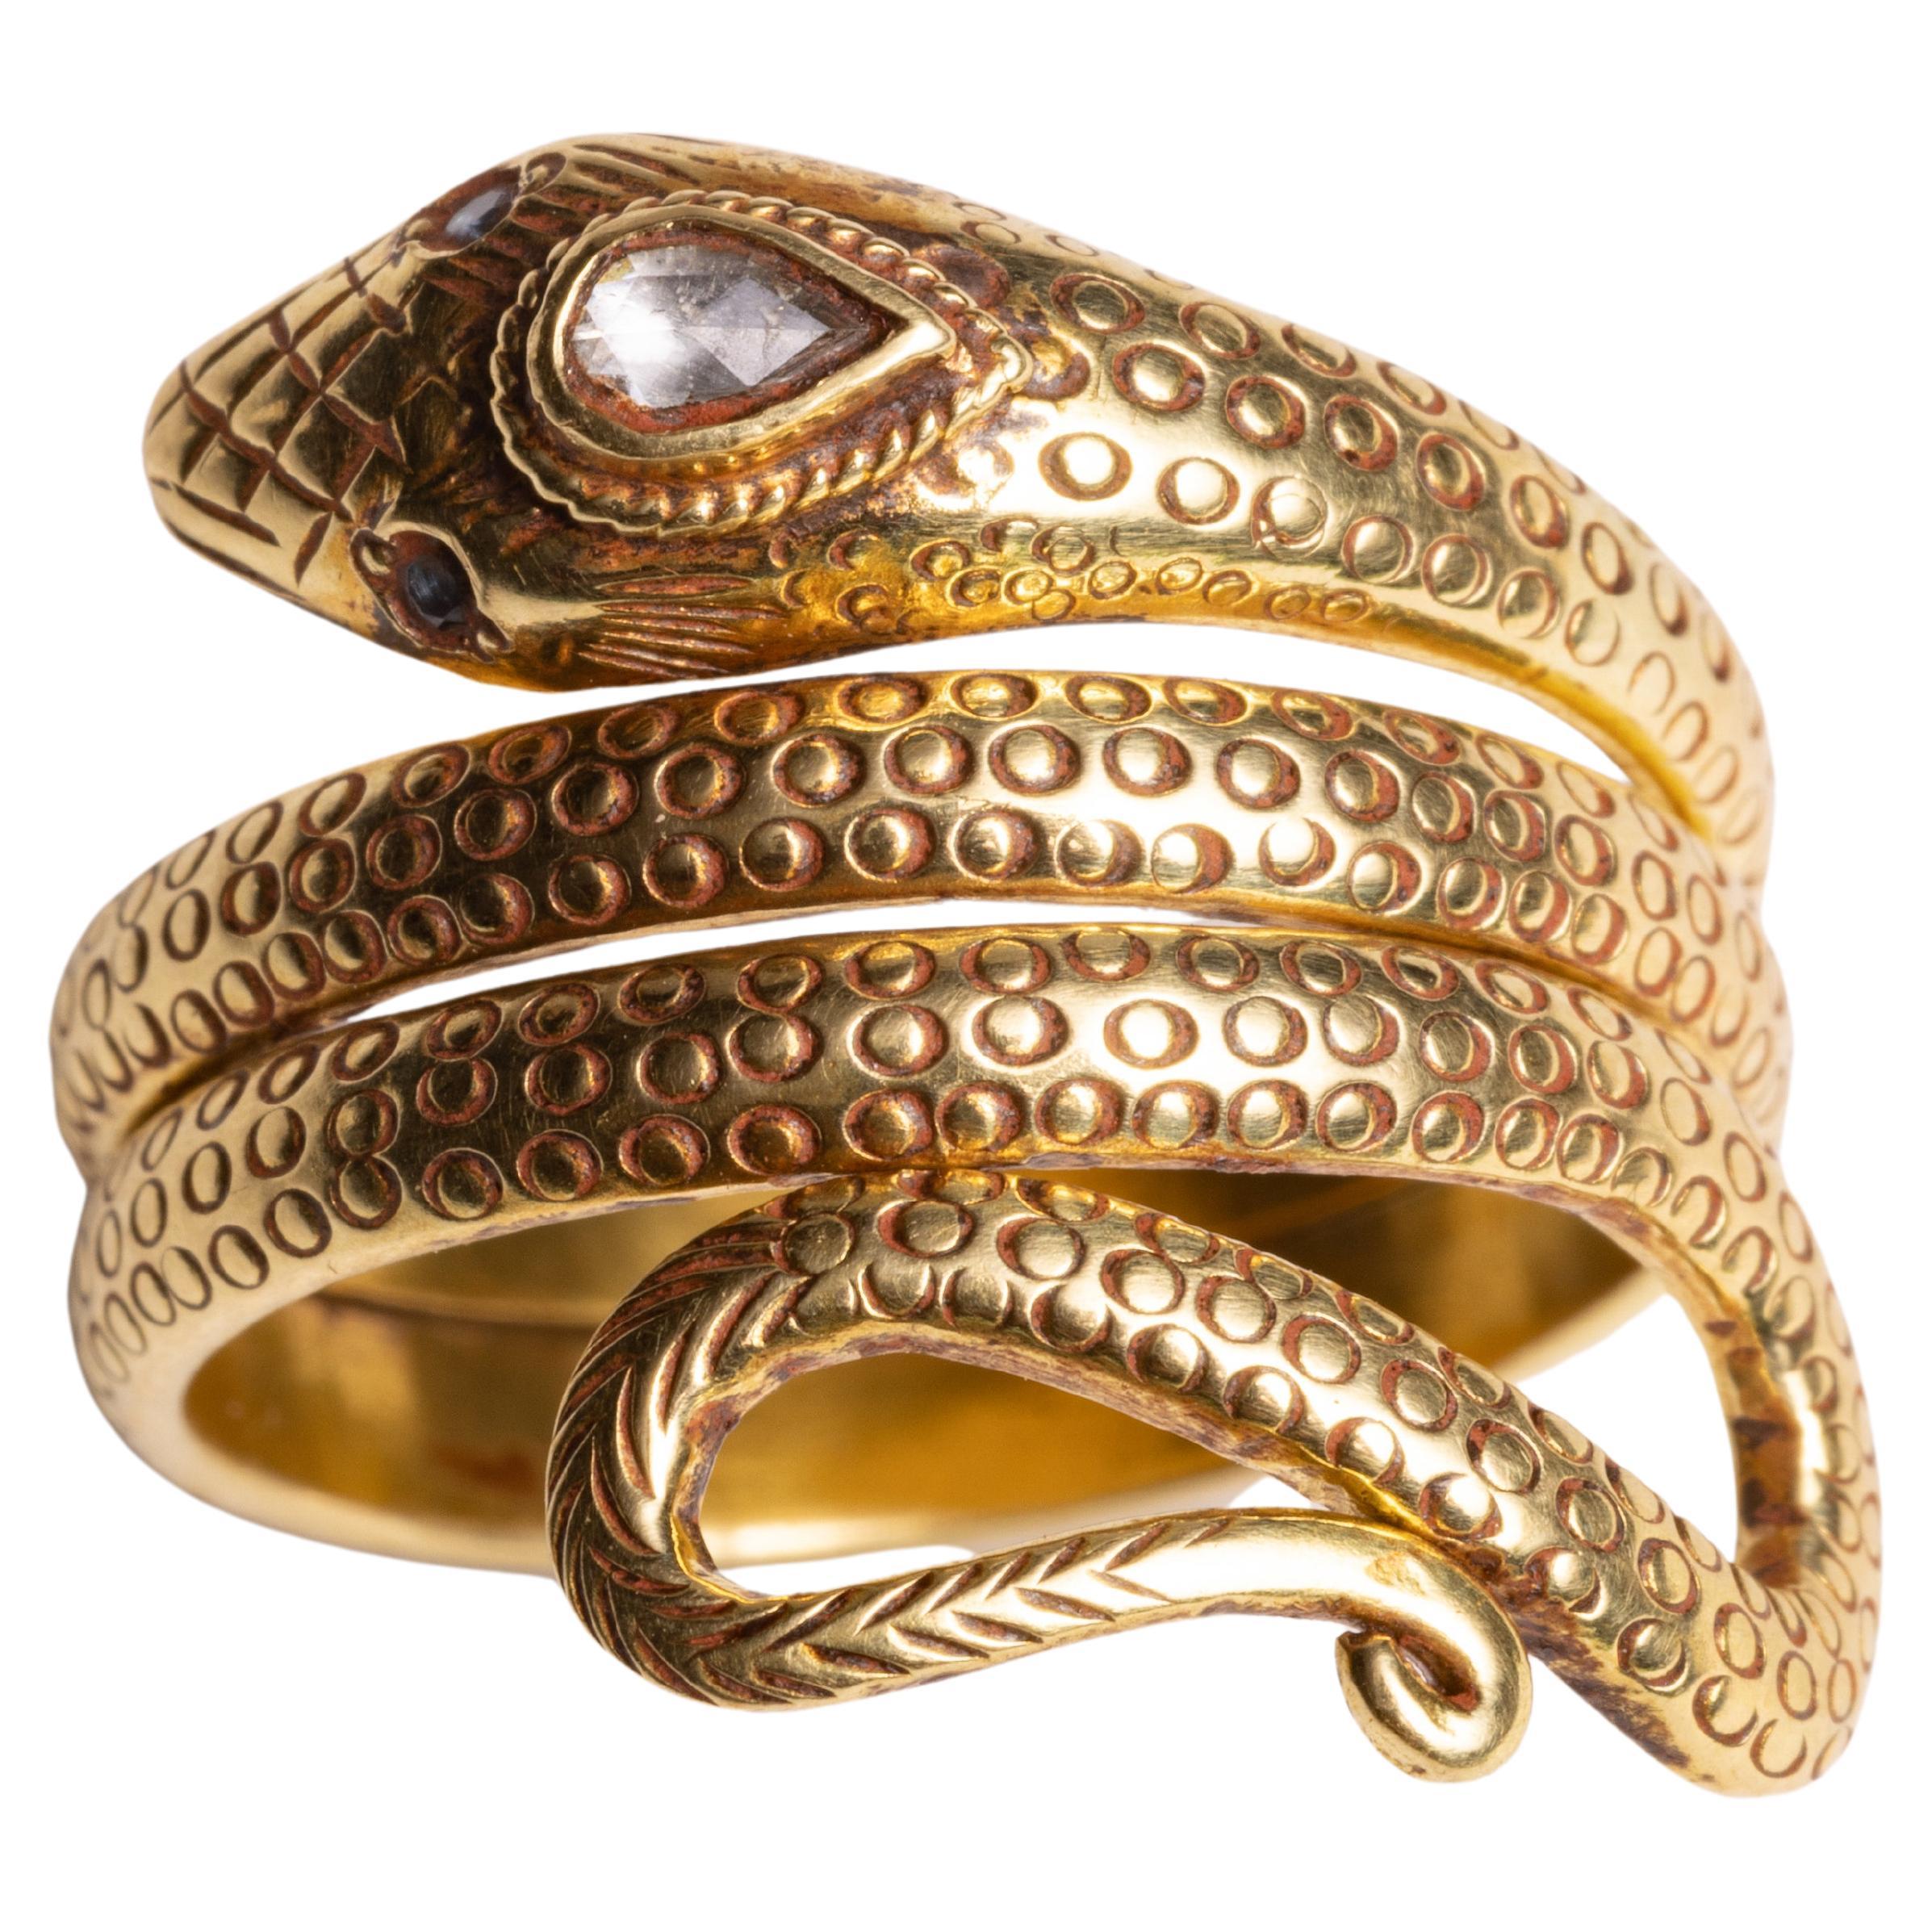 18K Gold Textured Coiled Snake Ring with Diamond